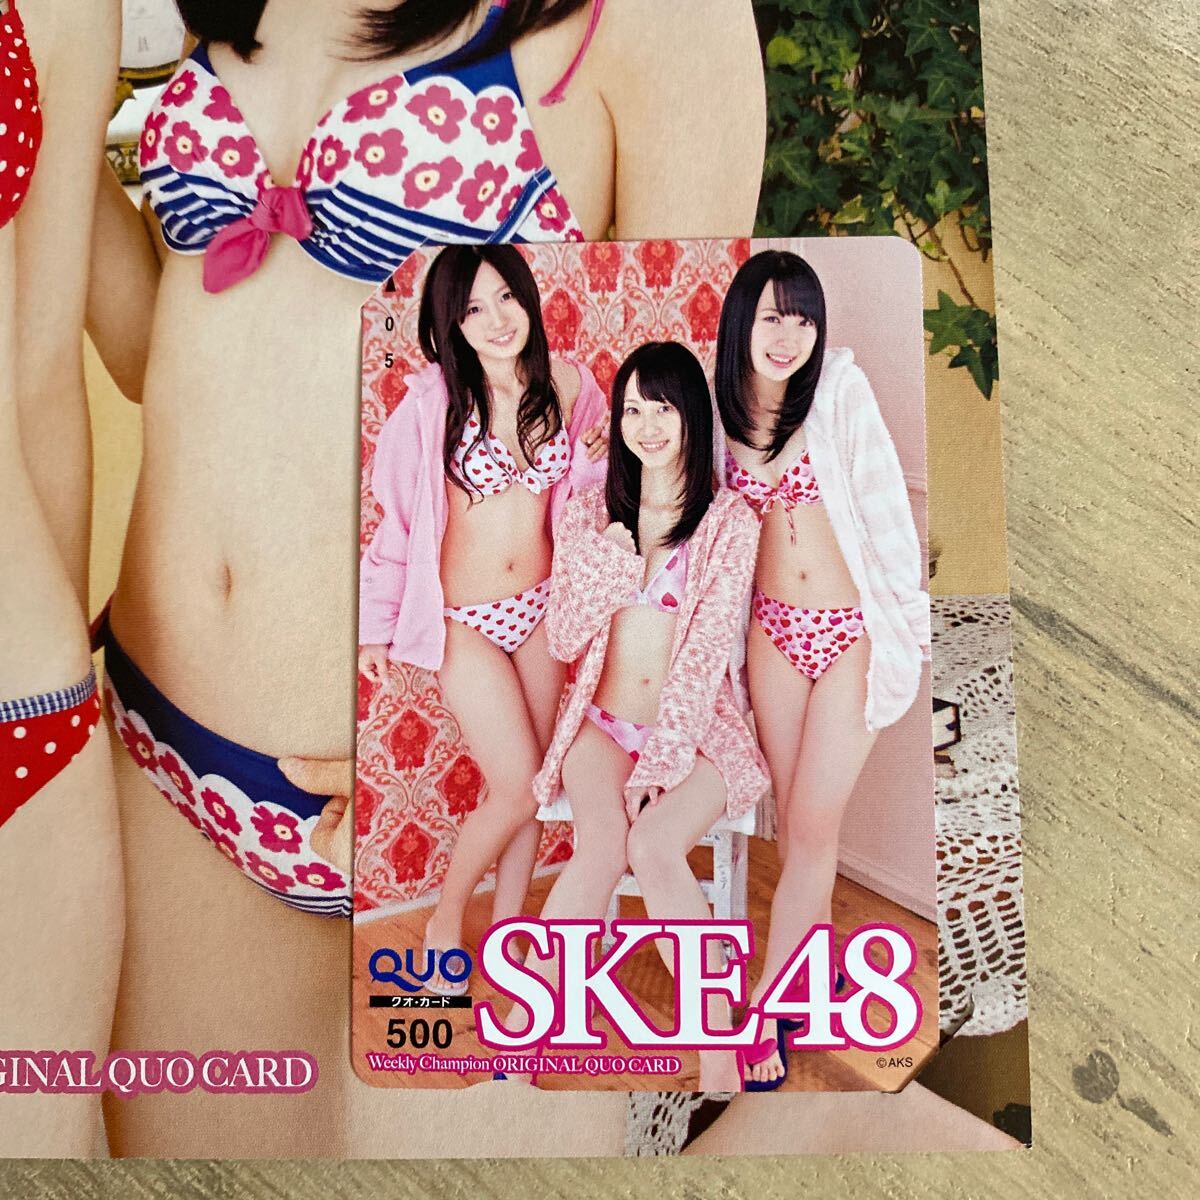 { unused } *QUO card 500 jpy *SKE48 * weekly Champion * cardboard attaching * Matsui Rena / height . Akira sound / old river love .